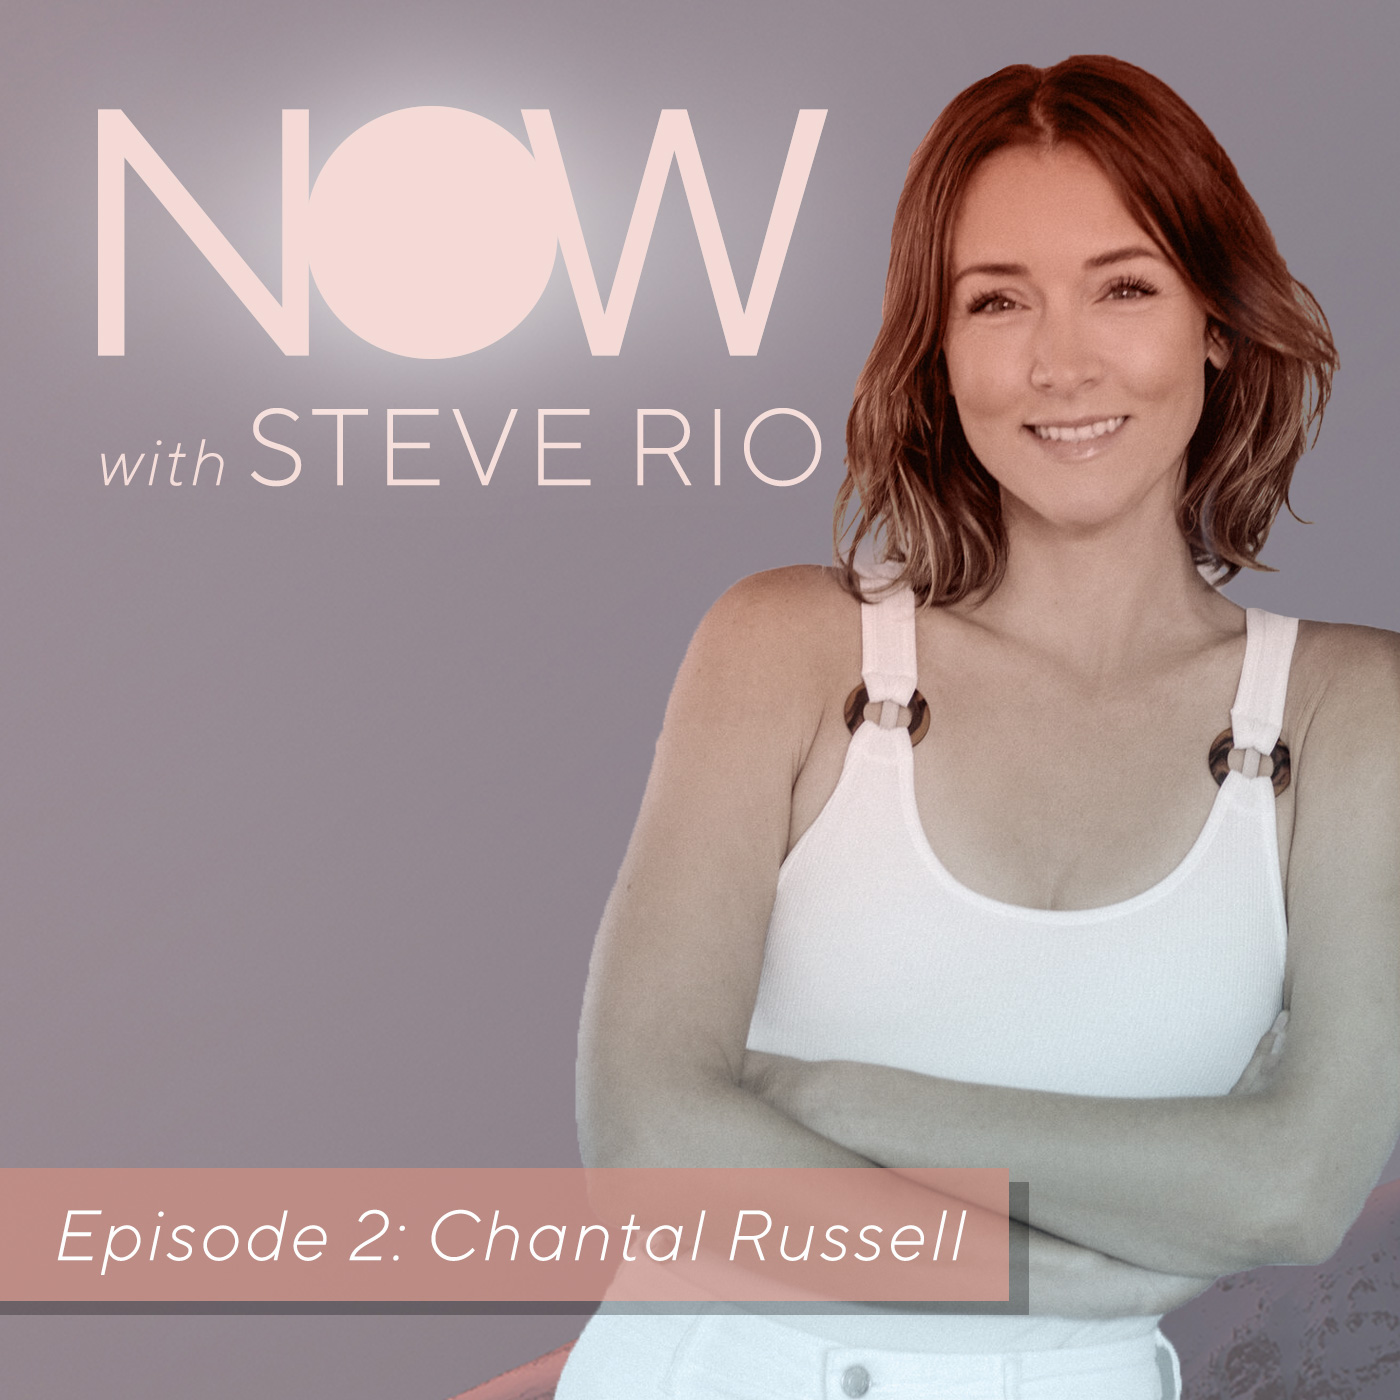 Chantal Russell on NOW with Steve Rio